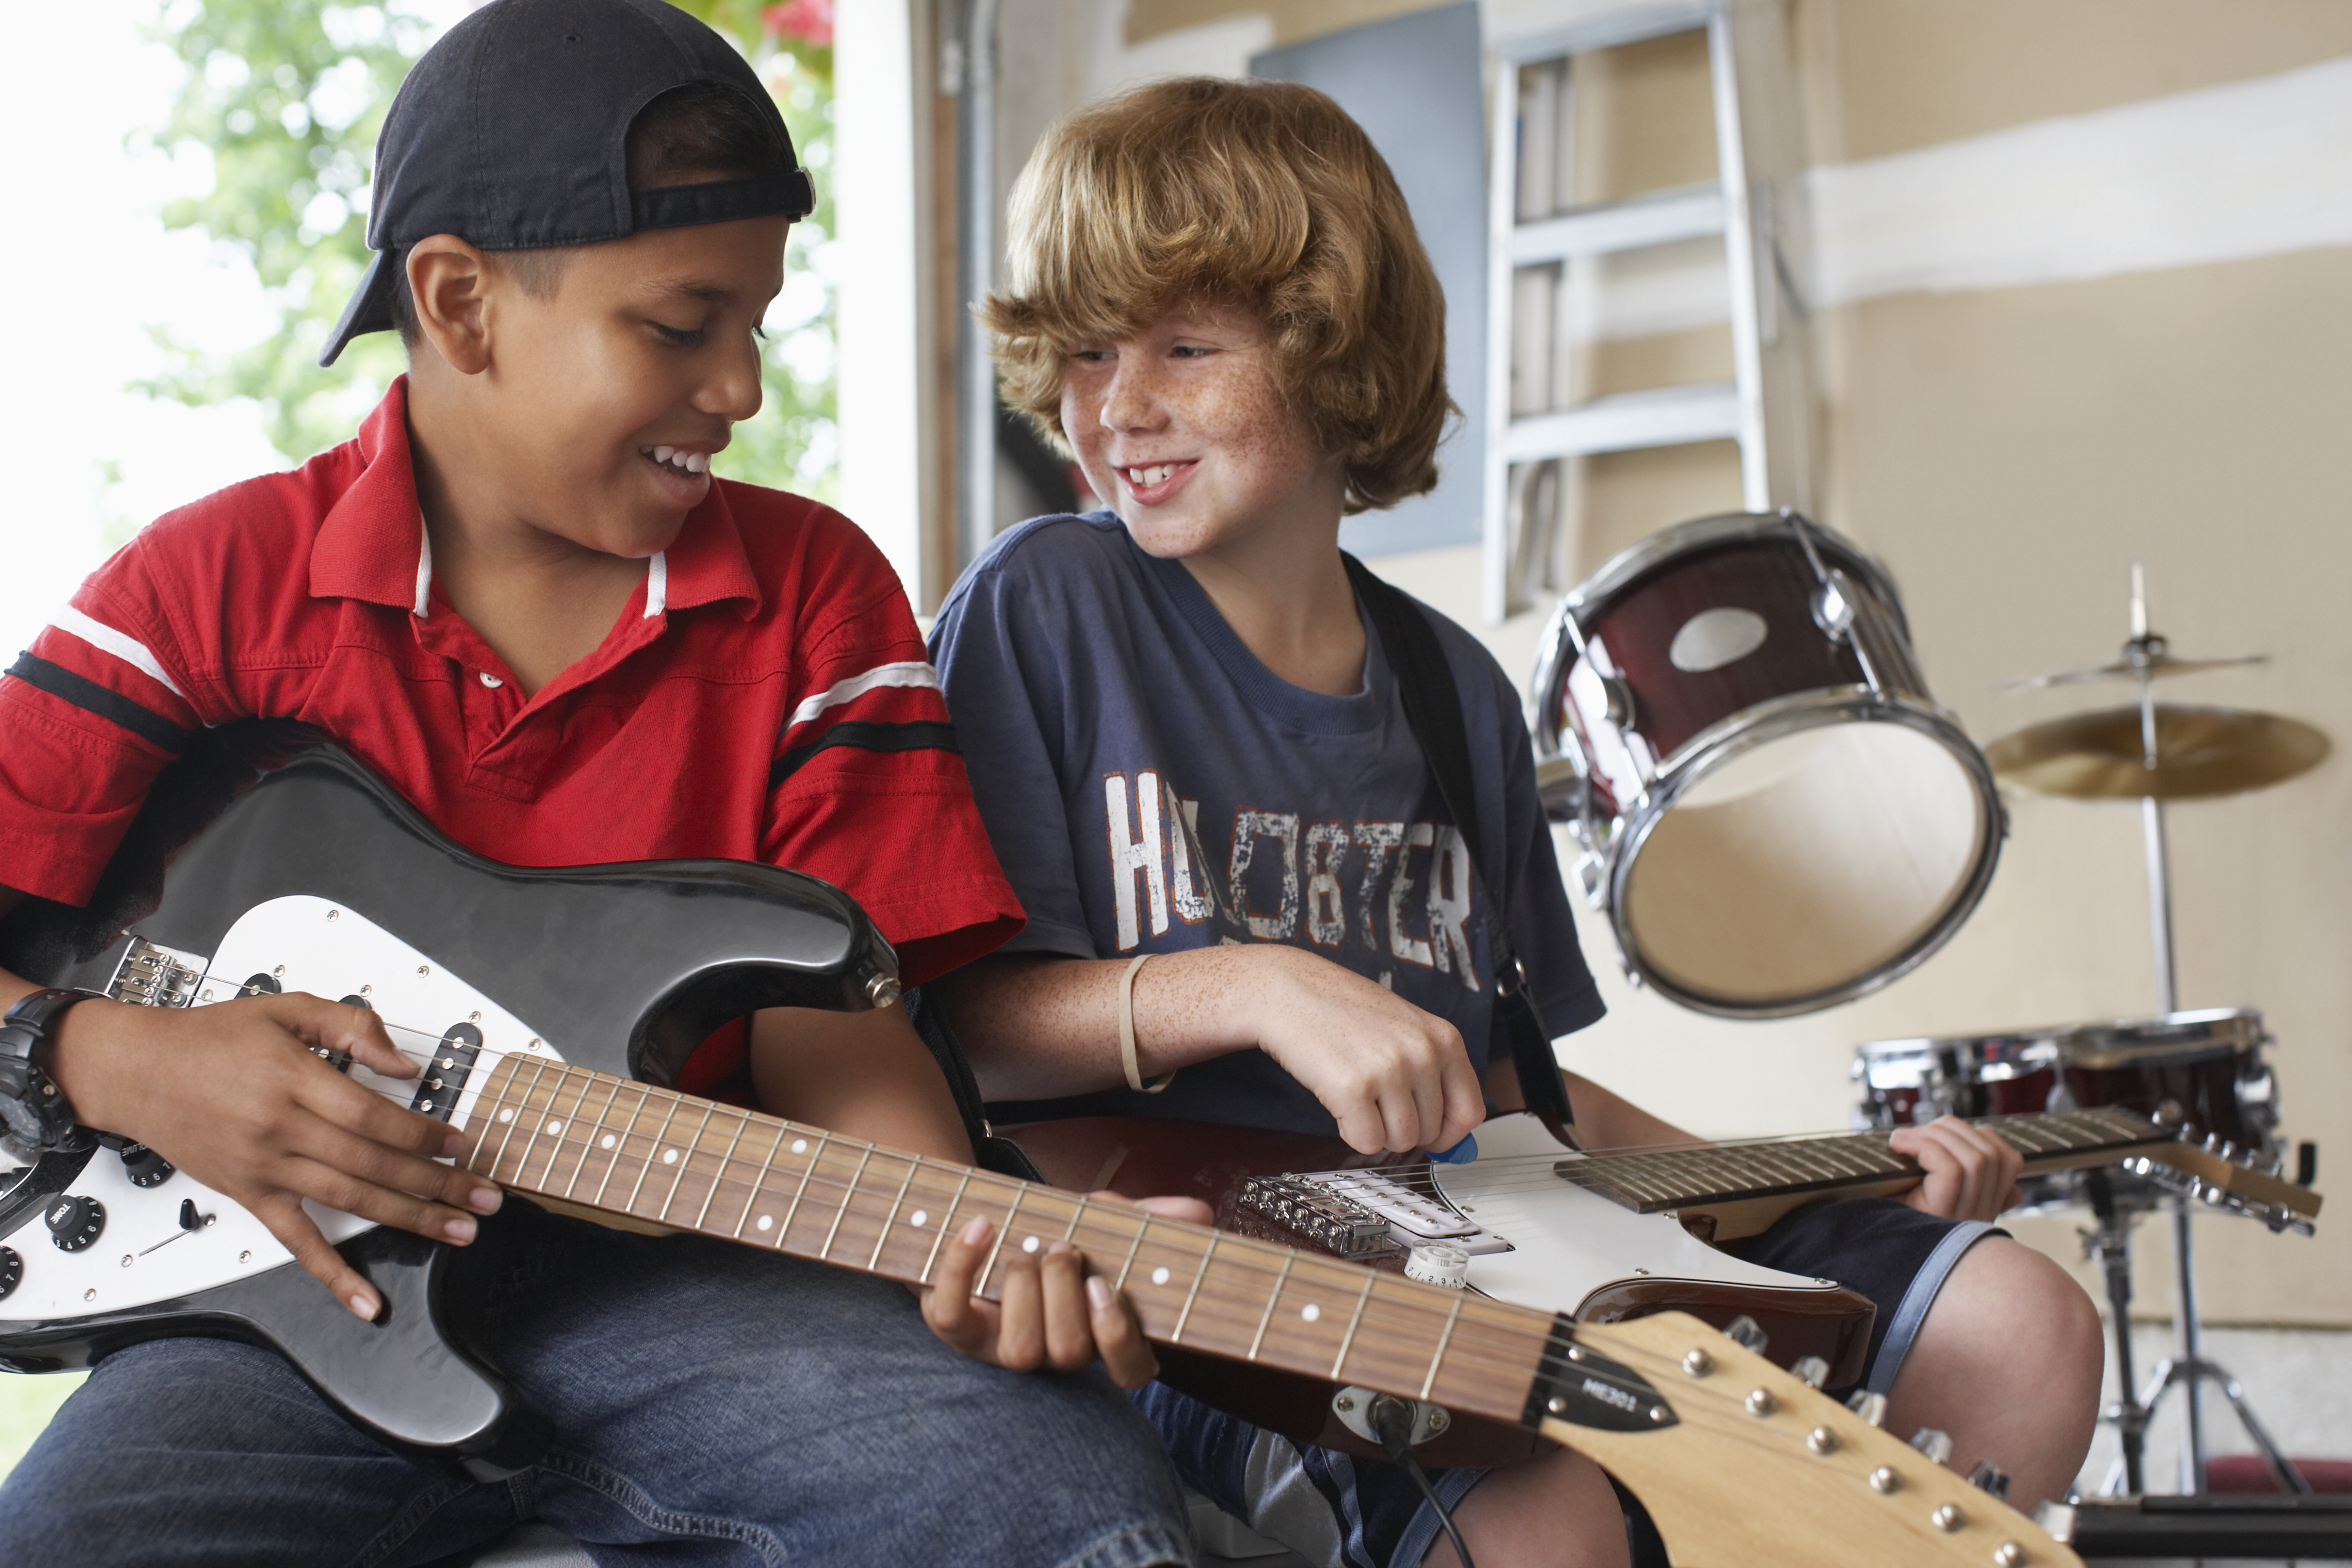 Two young teens learning to play guitar and drums